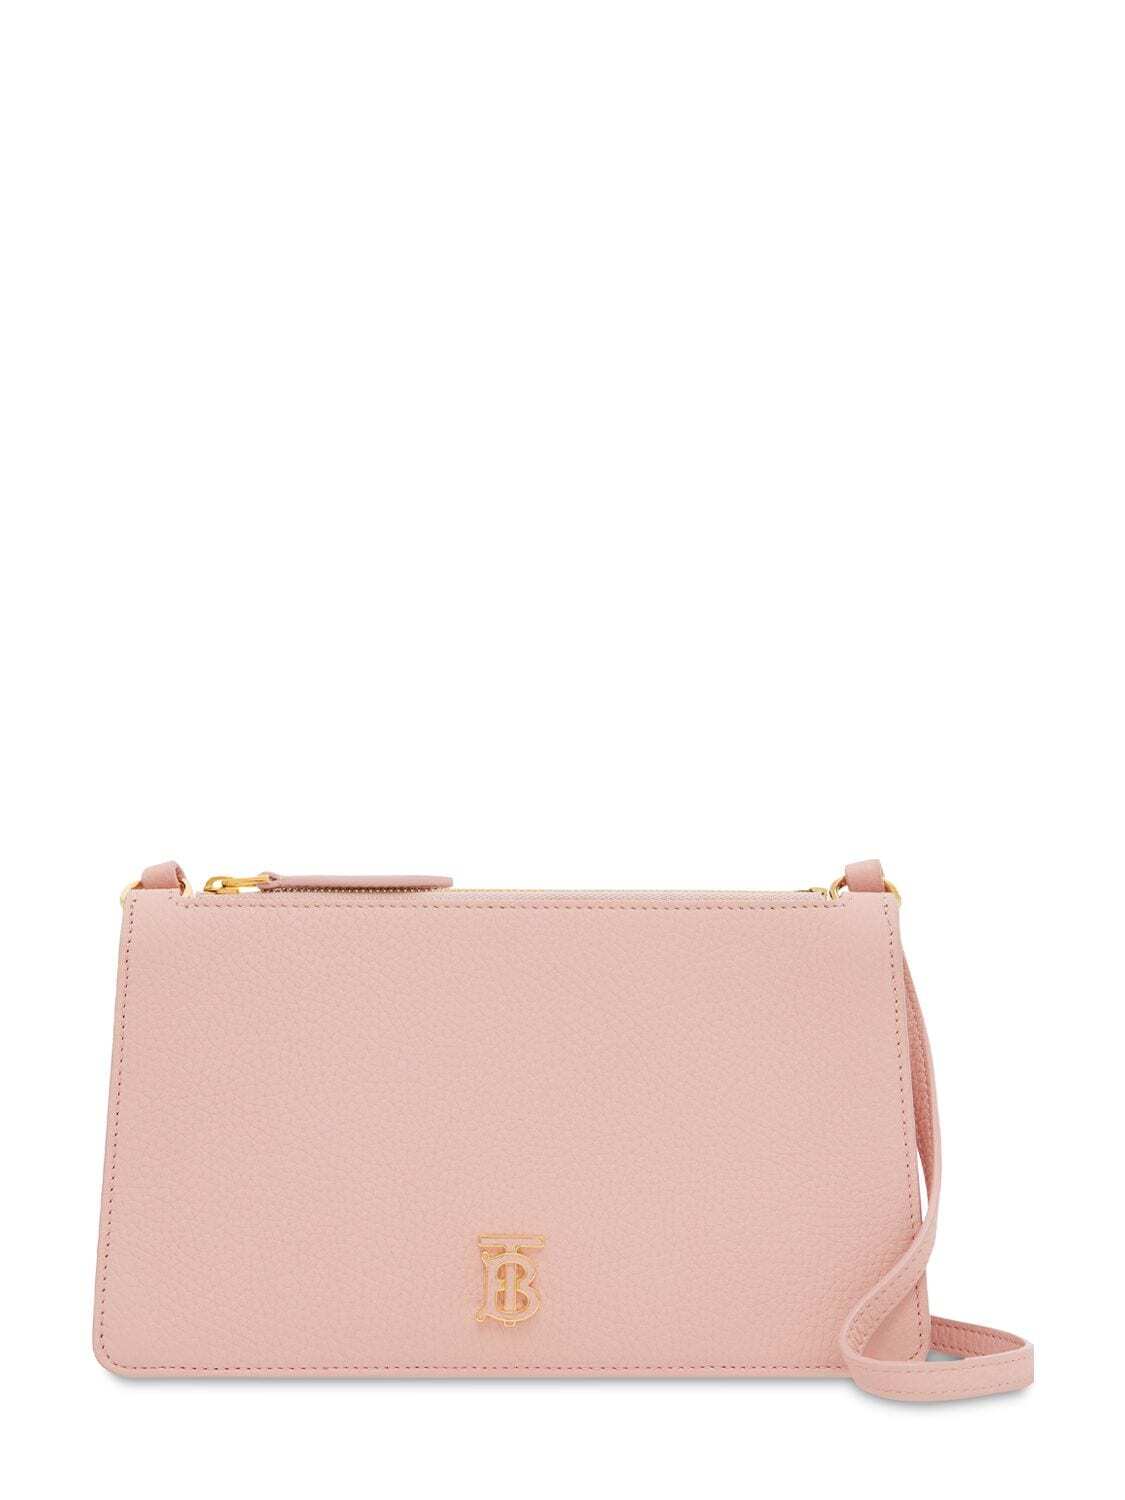 BURBERRY Tb Pouch Grainy Leather Top Handle Bag in pink